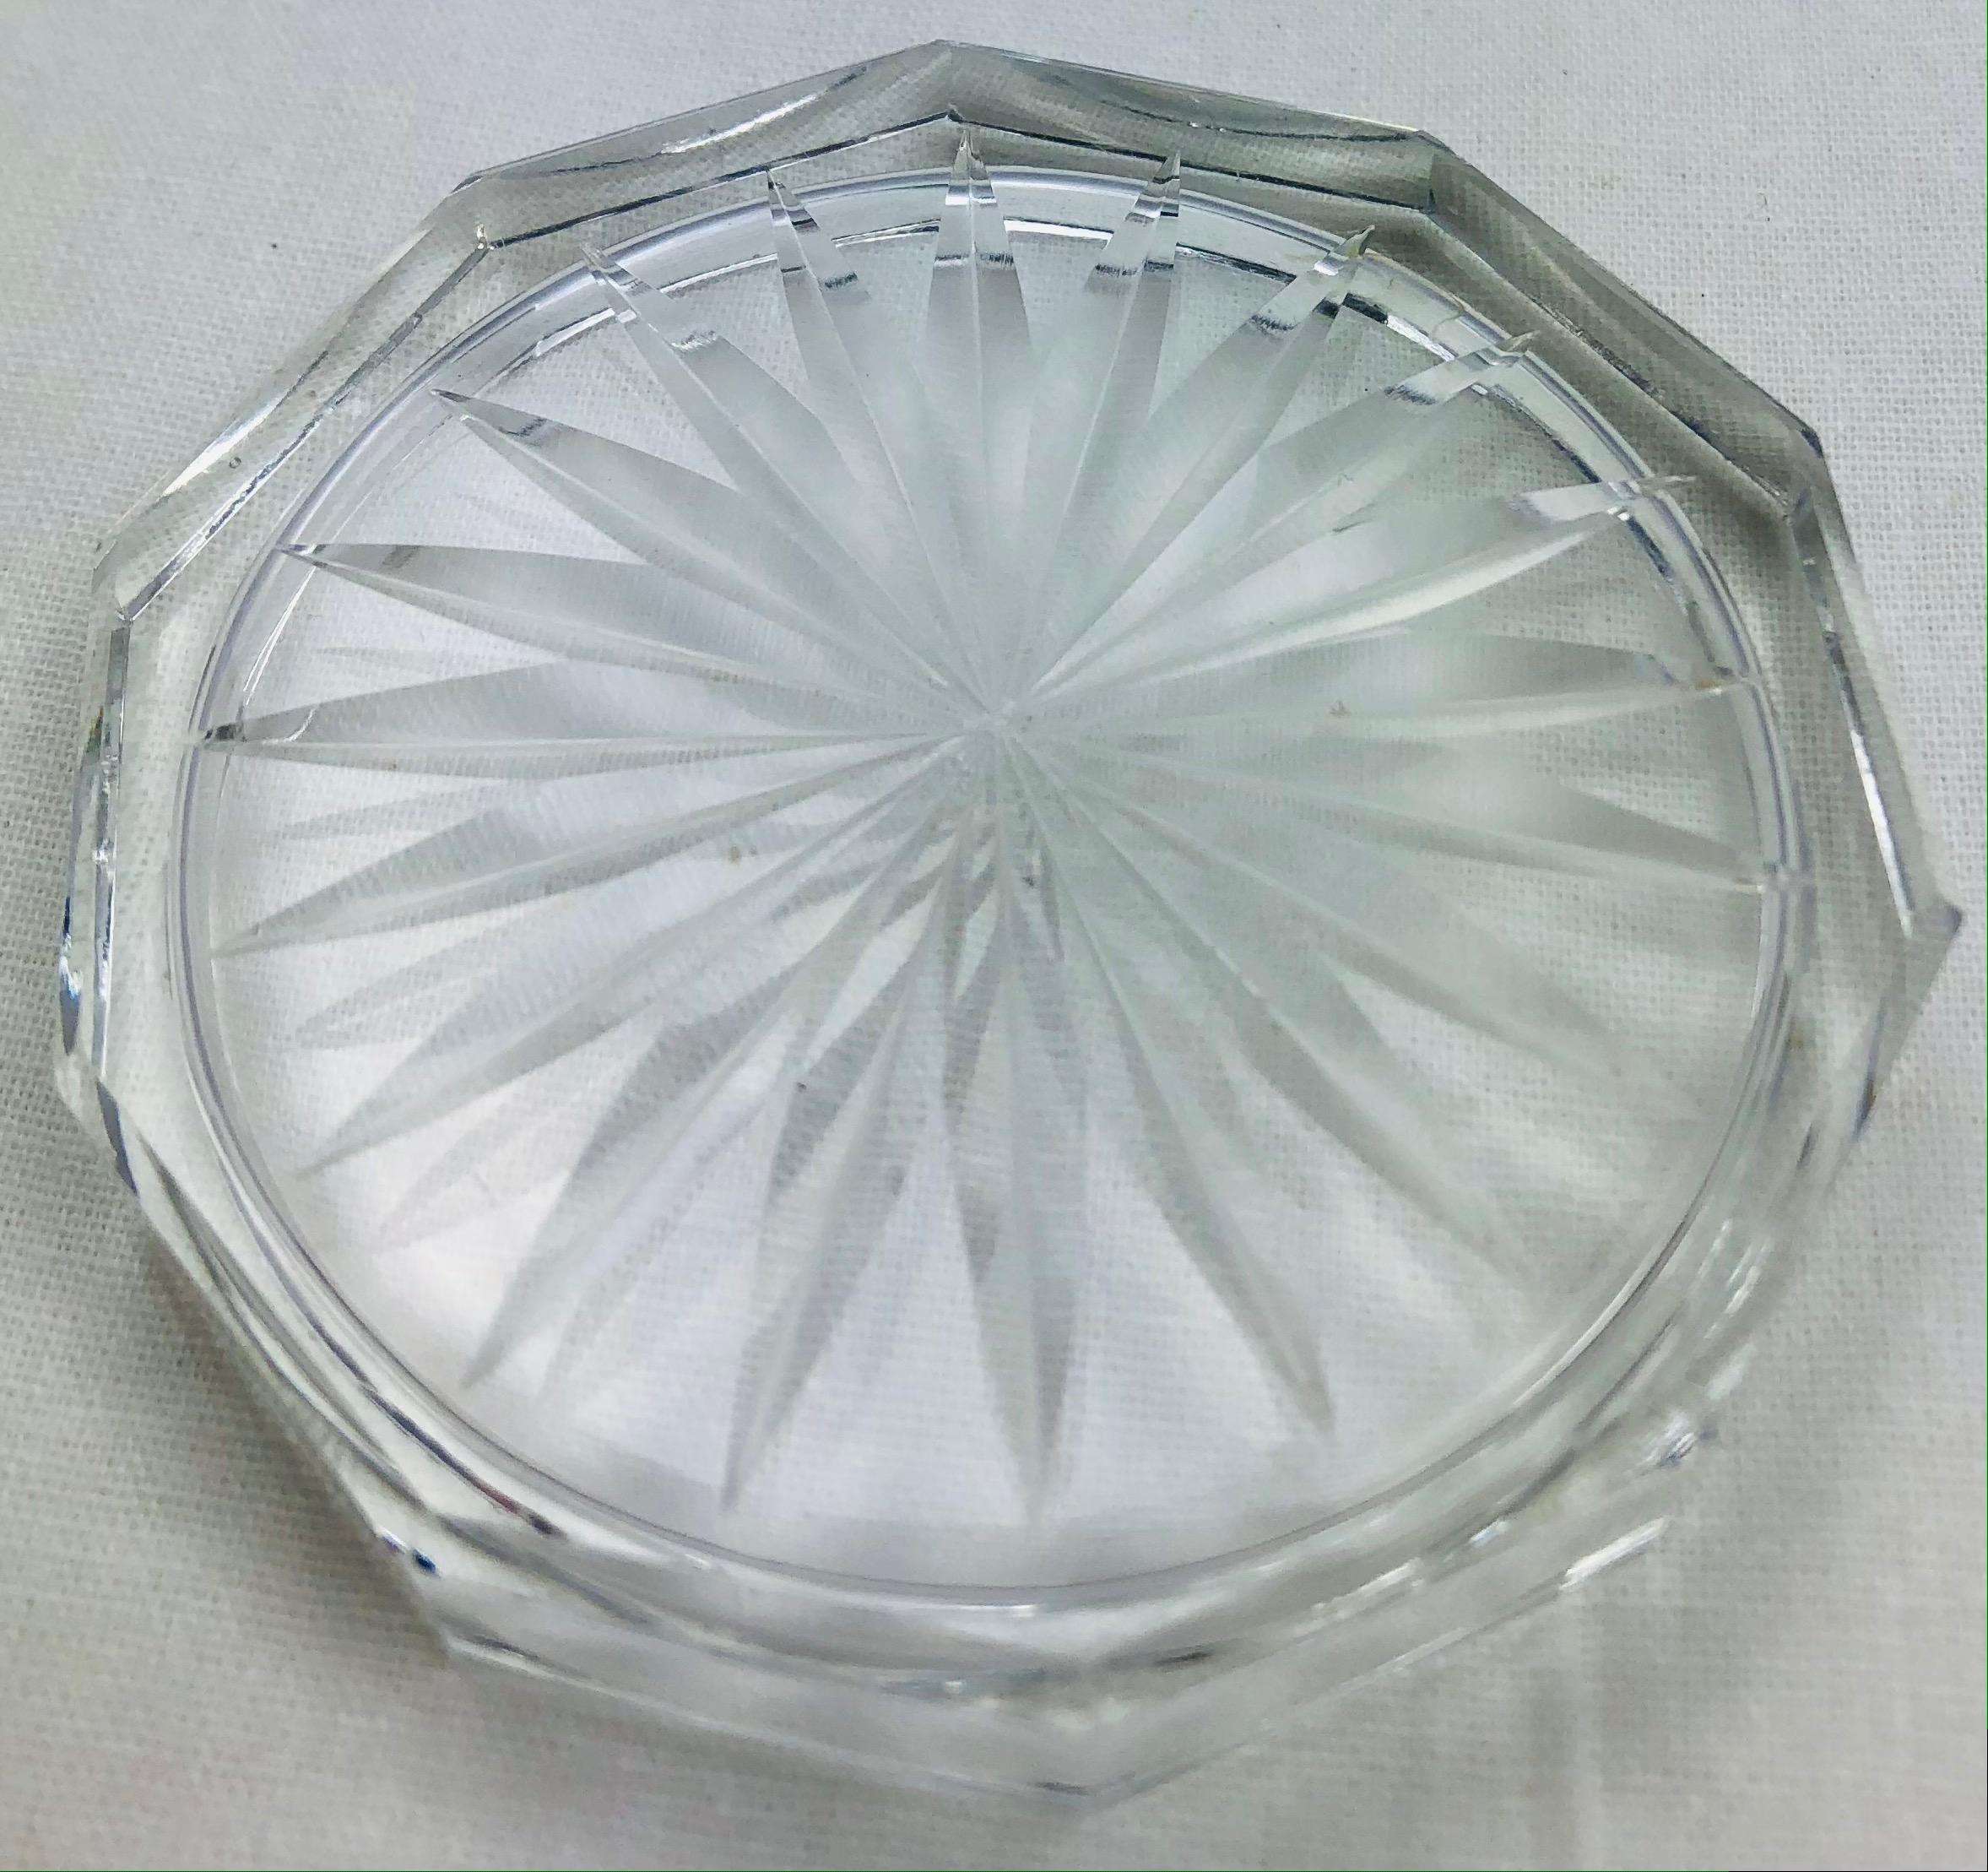 Beautiful set of 9 vintage French crystal wine or champagne coasters, attributed to Baccarat. Lovely table accessories with a mixture of straight sharp cuts and smooth round curves, reminiscent of a rose. The most important aspect of this collection